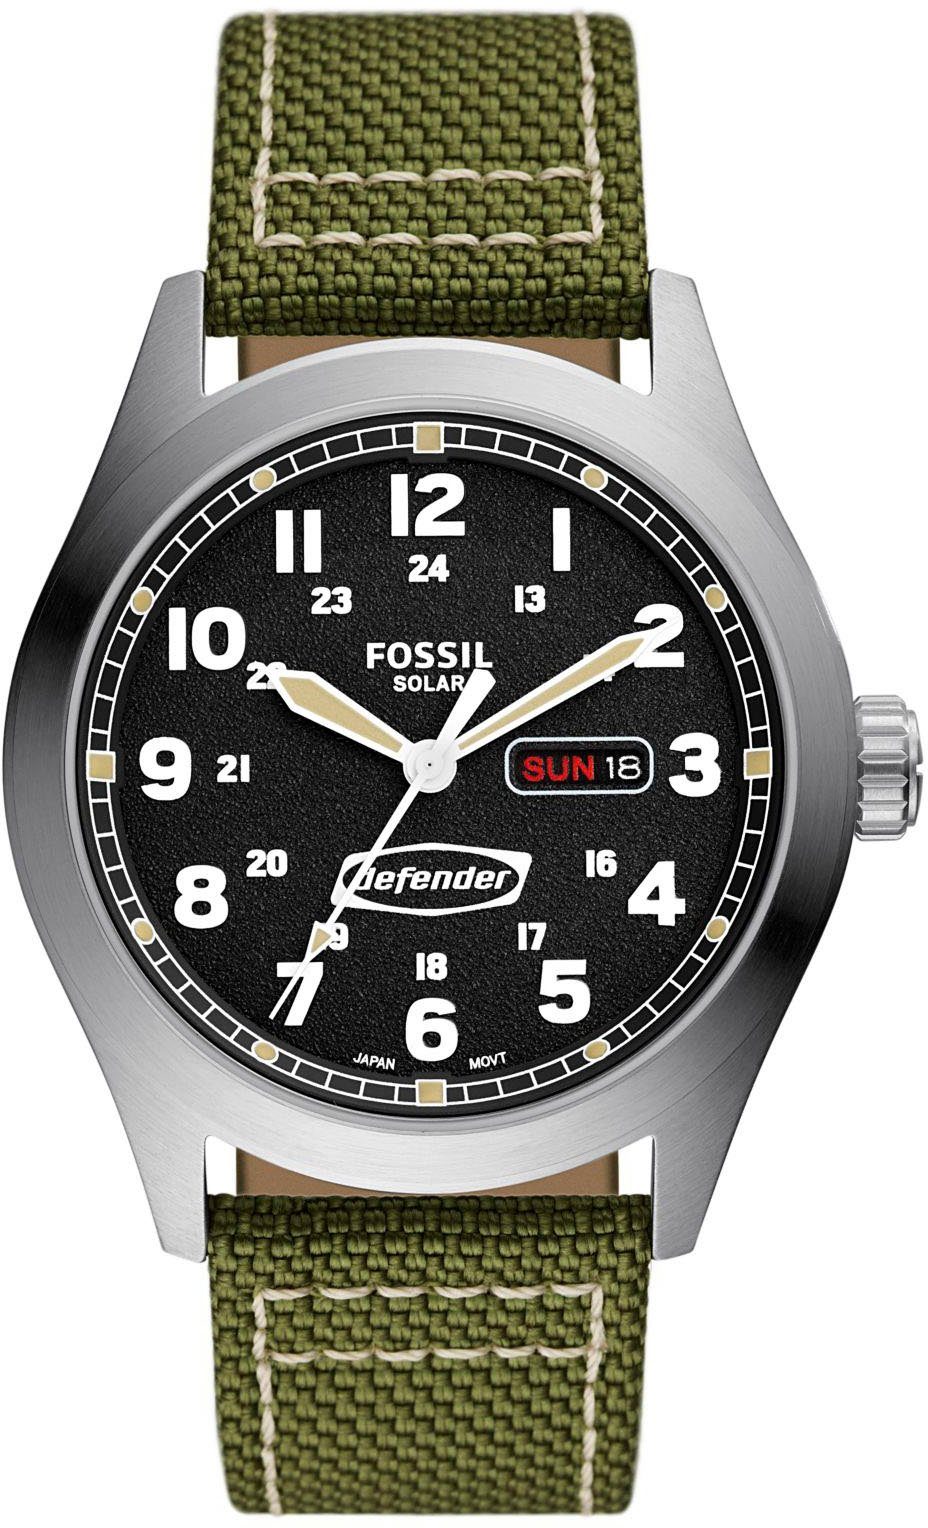 Fossil Solaruhr DEFENDER, limited edition FS5977